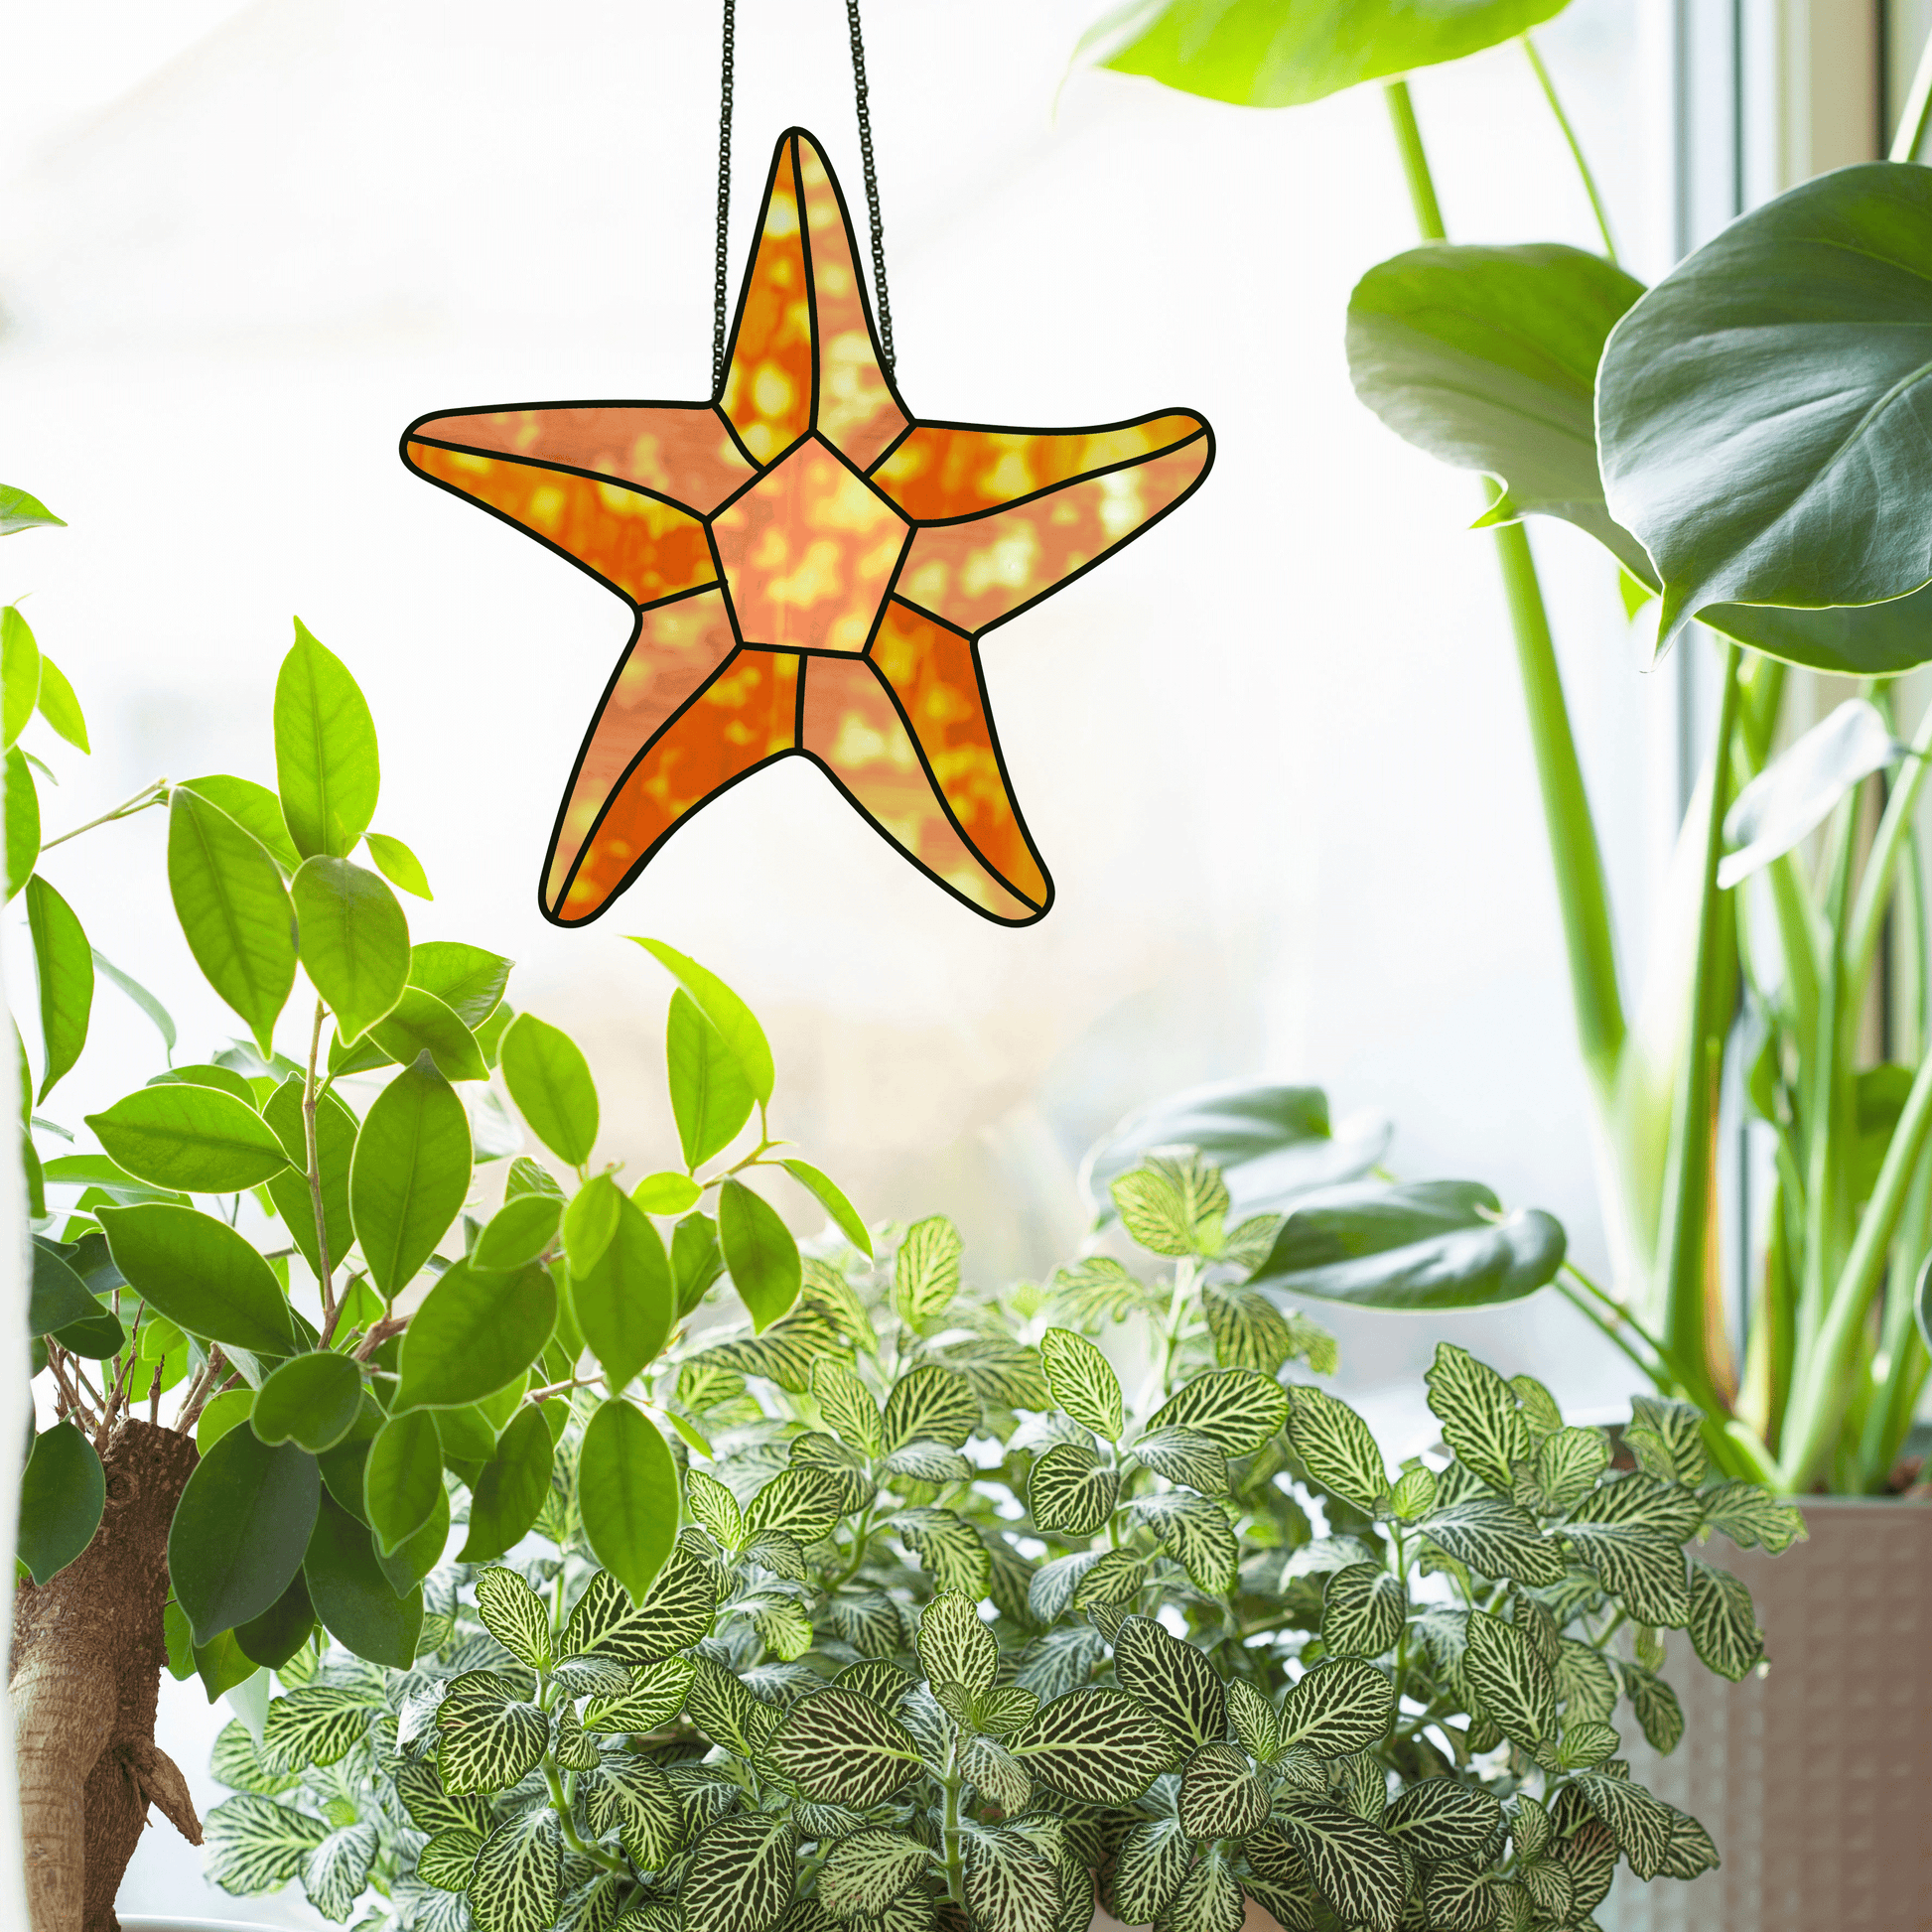 Starfish or seastar stained glass pattern, instant pdf download, shown in window with plants